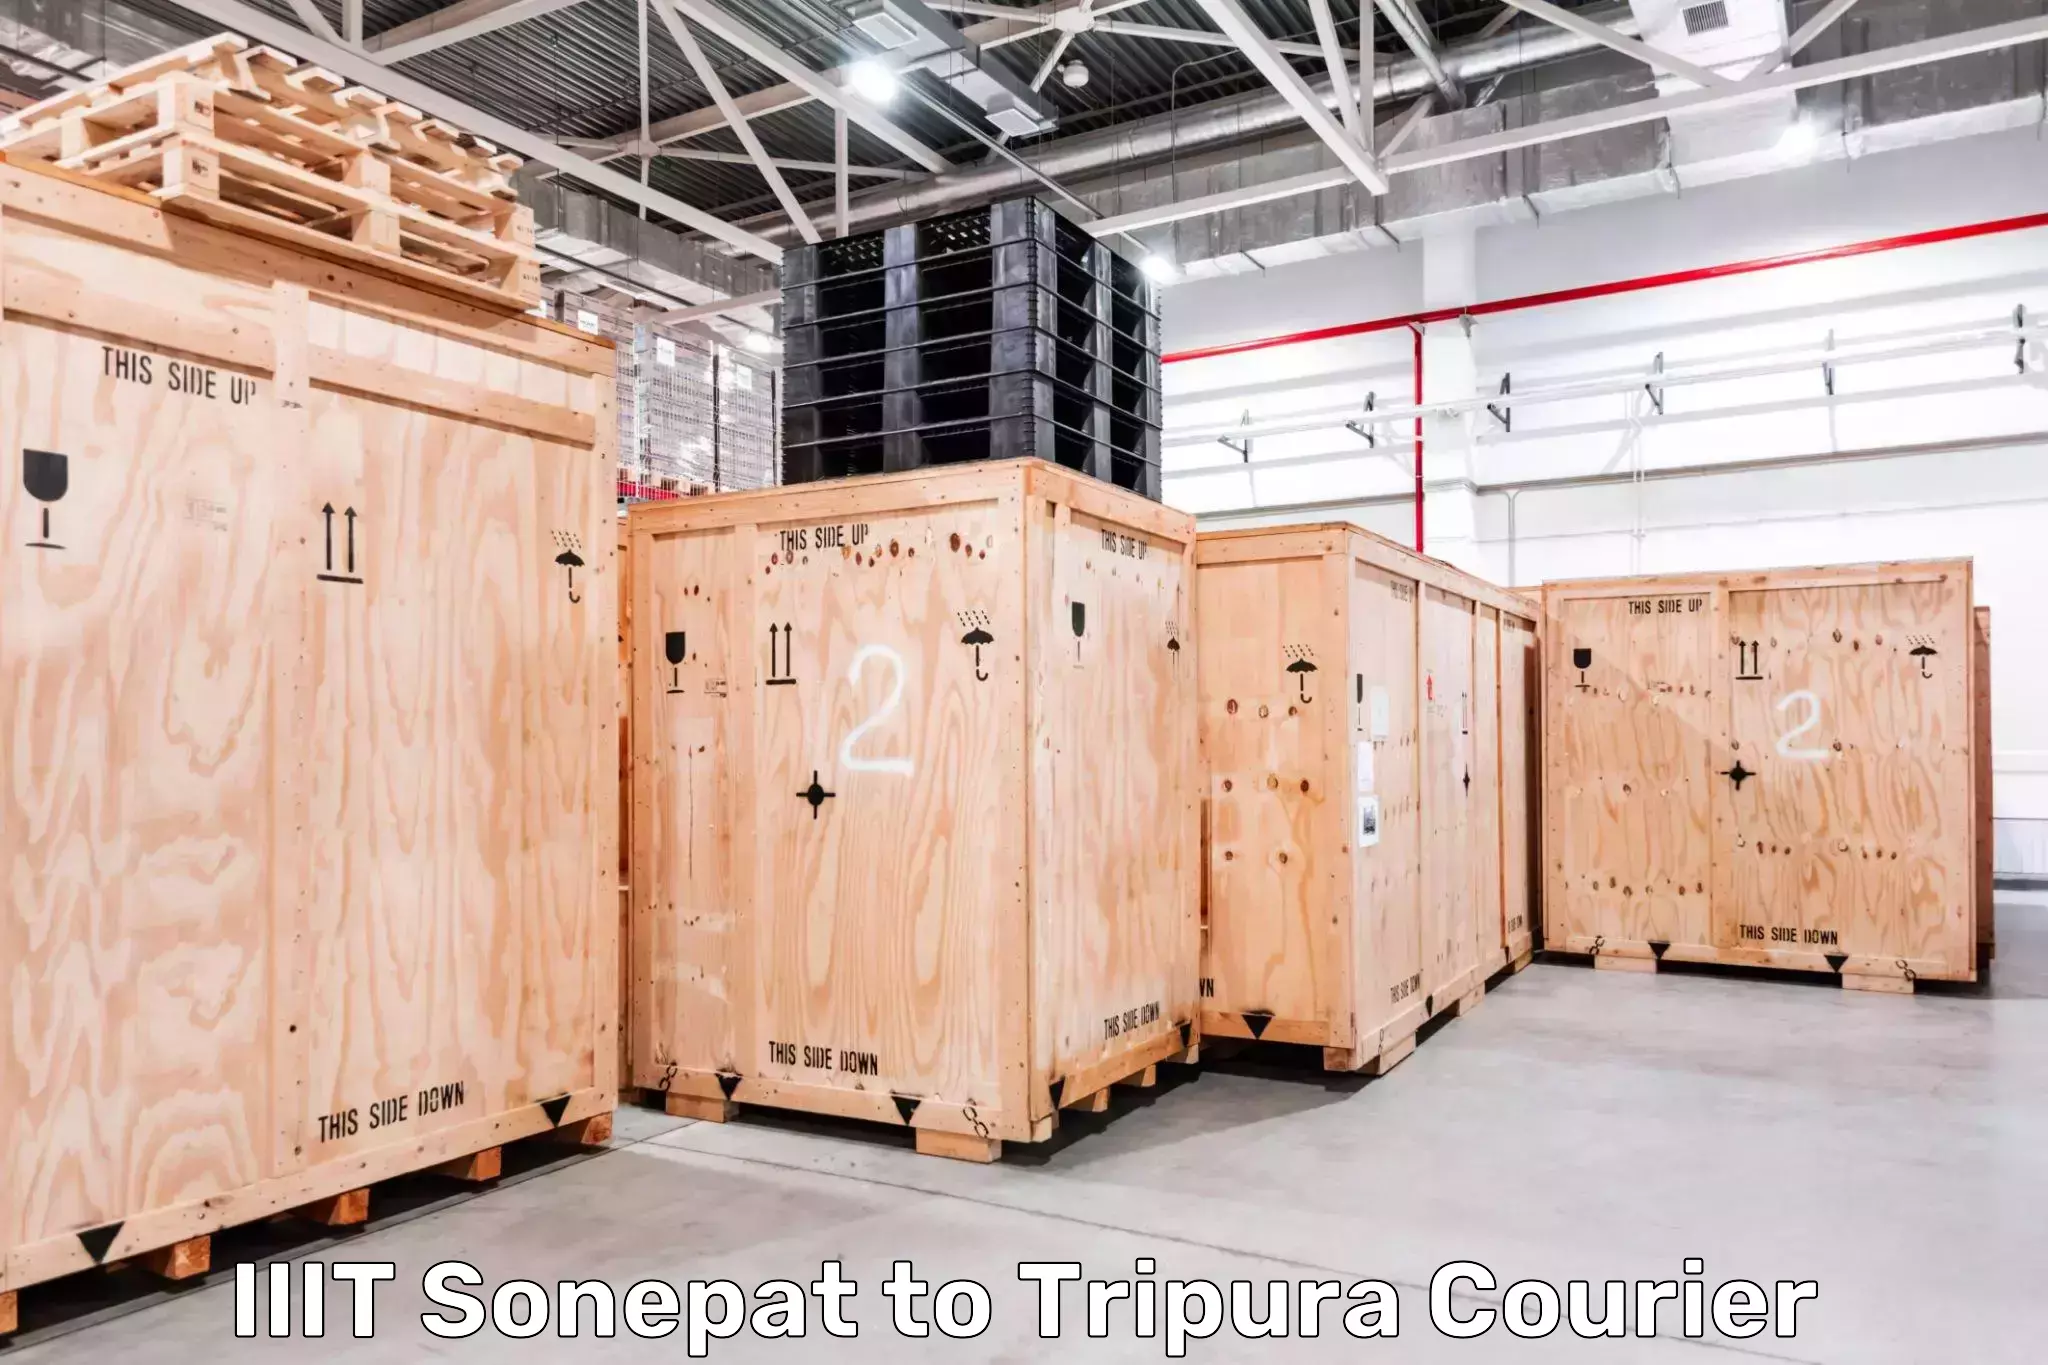 State-of-the-art courier technology IIIT Sonepat to Khowai